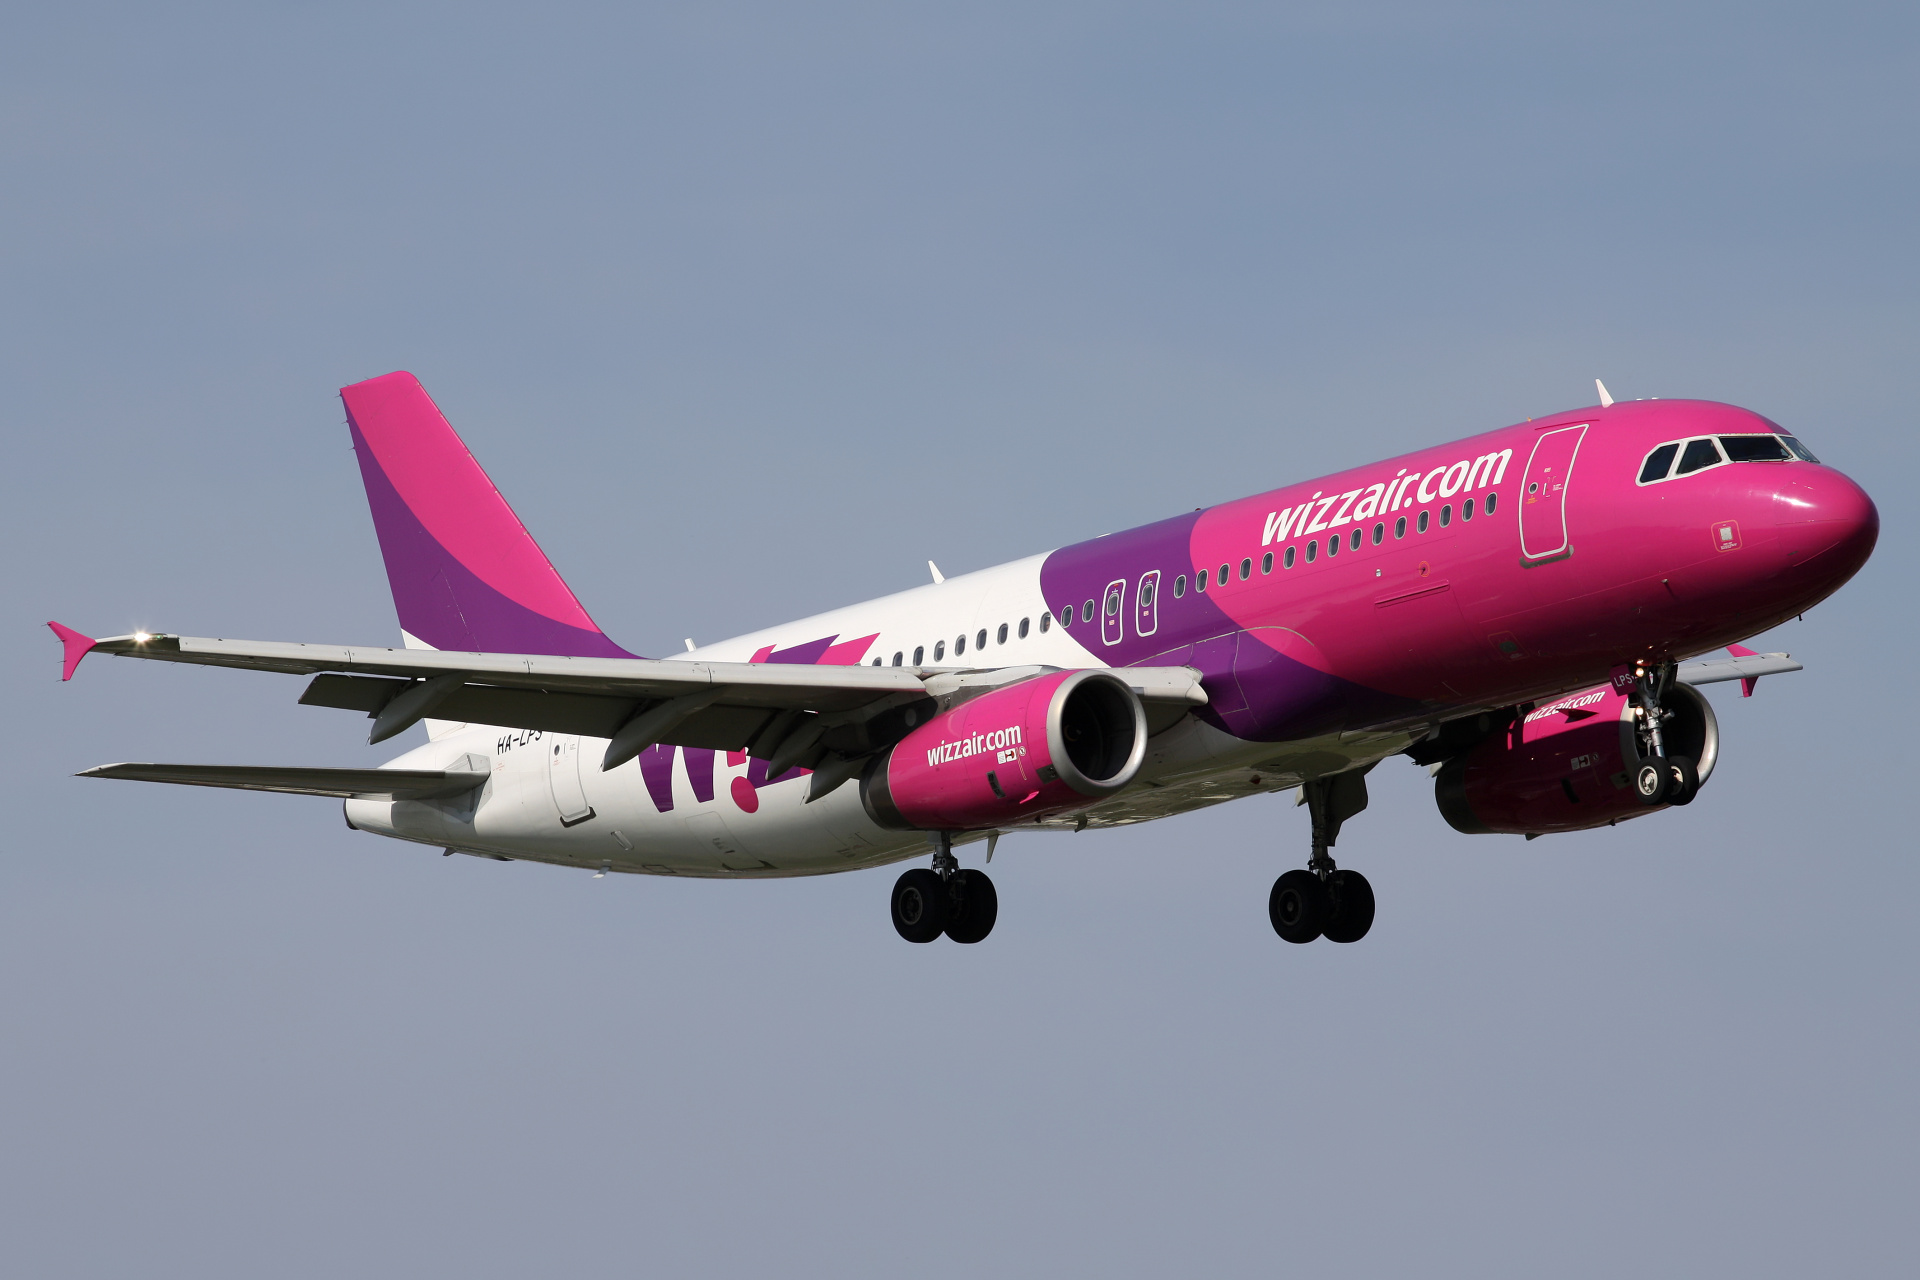 HA-LPS (Aircraft » EPWA Spotting » Airbus A320-200 » Wizz Air)